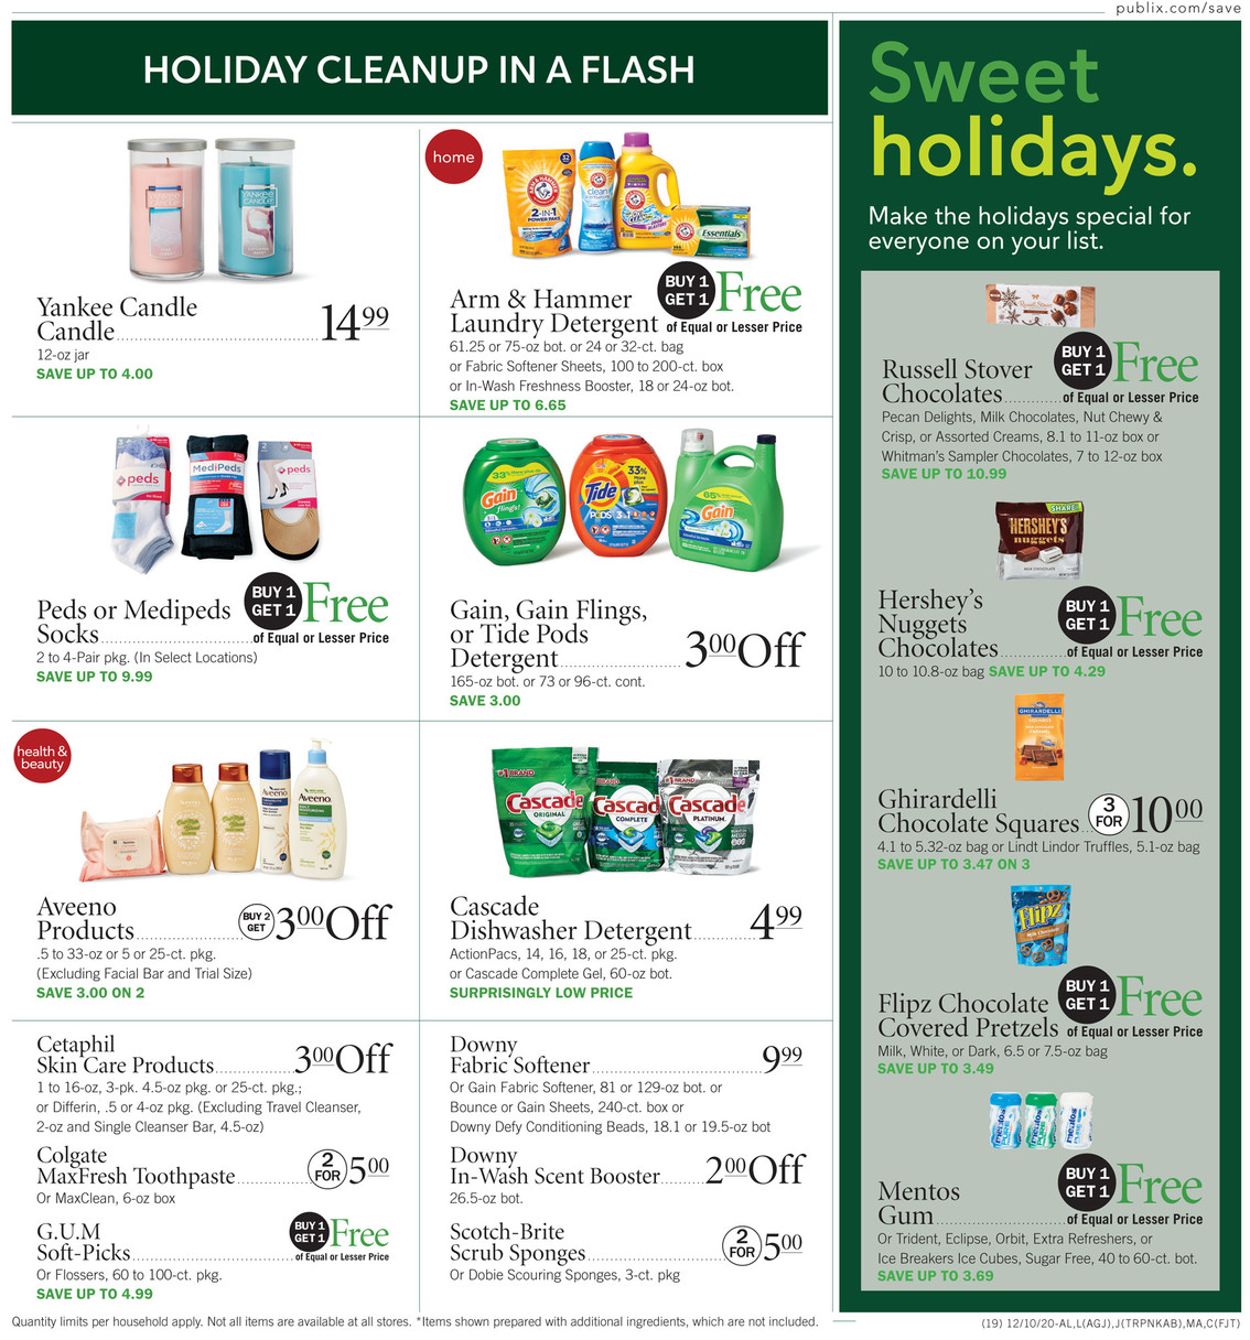 Publix Holiday Helpers 2020 Weekly Ad Circular - valid 12/10-12/16/2020 (Page 19)